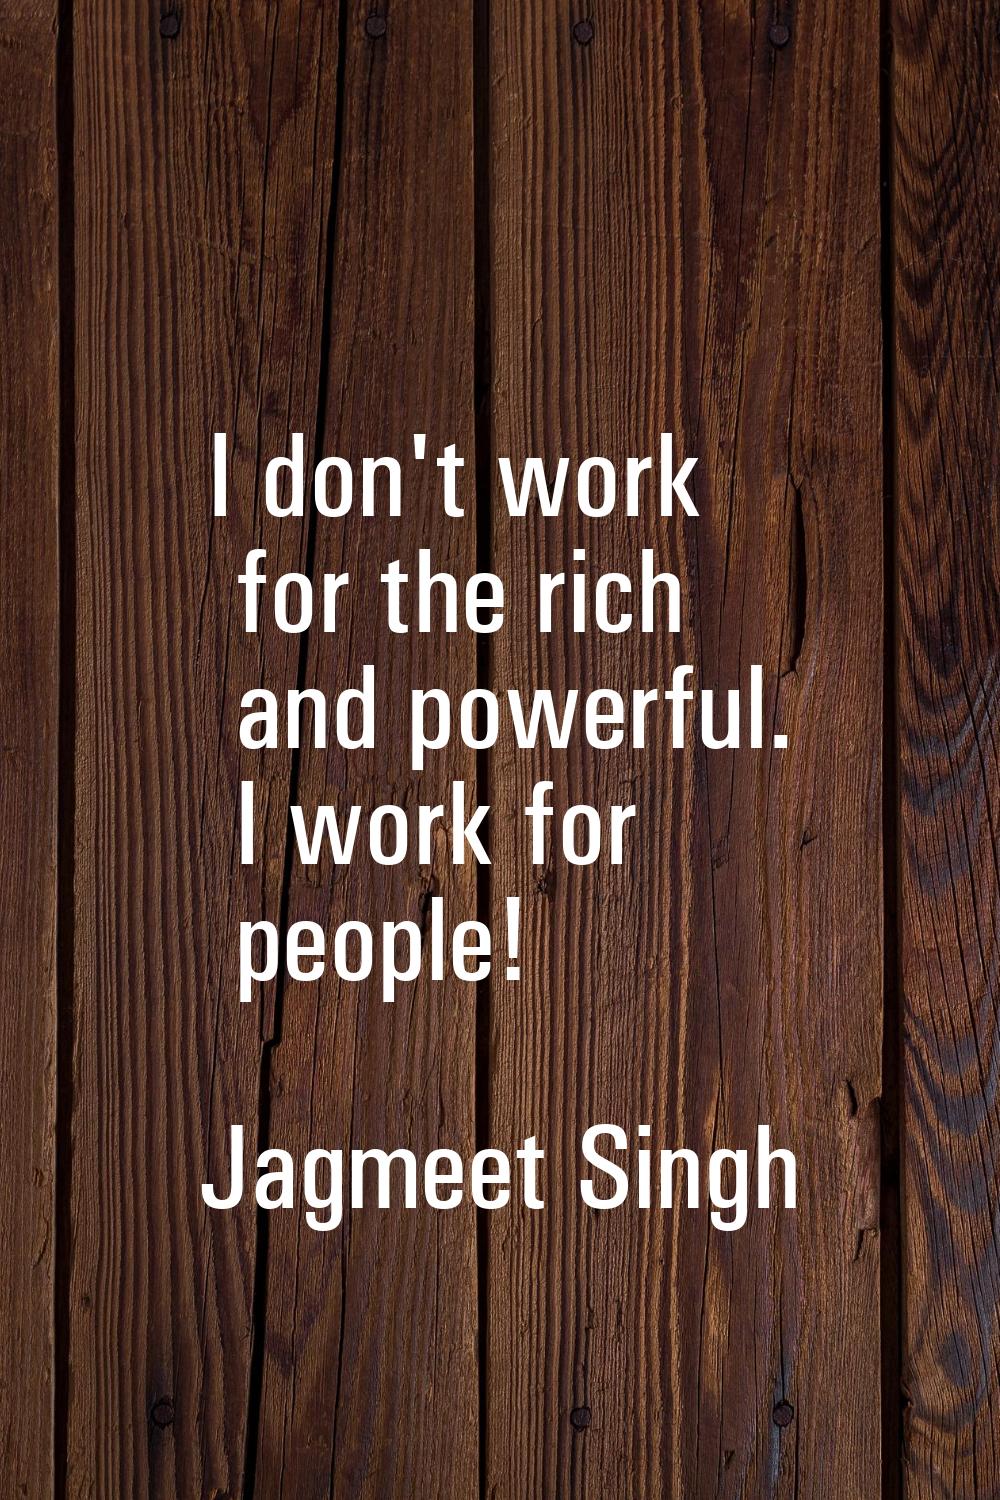 I don't work for the rich and powerful. I work for people!